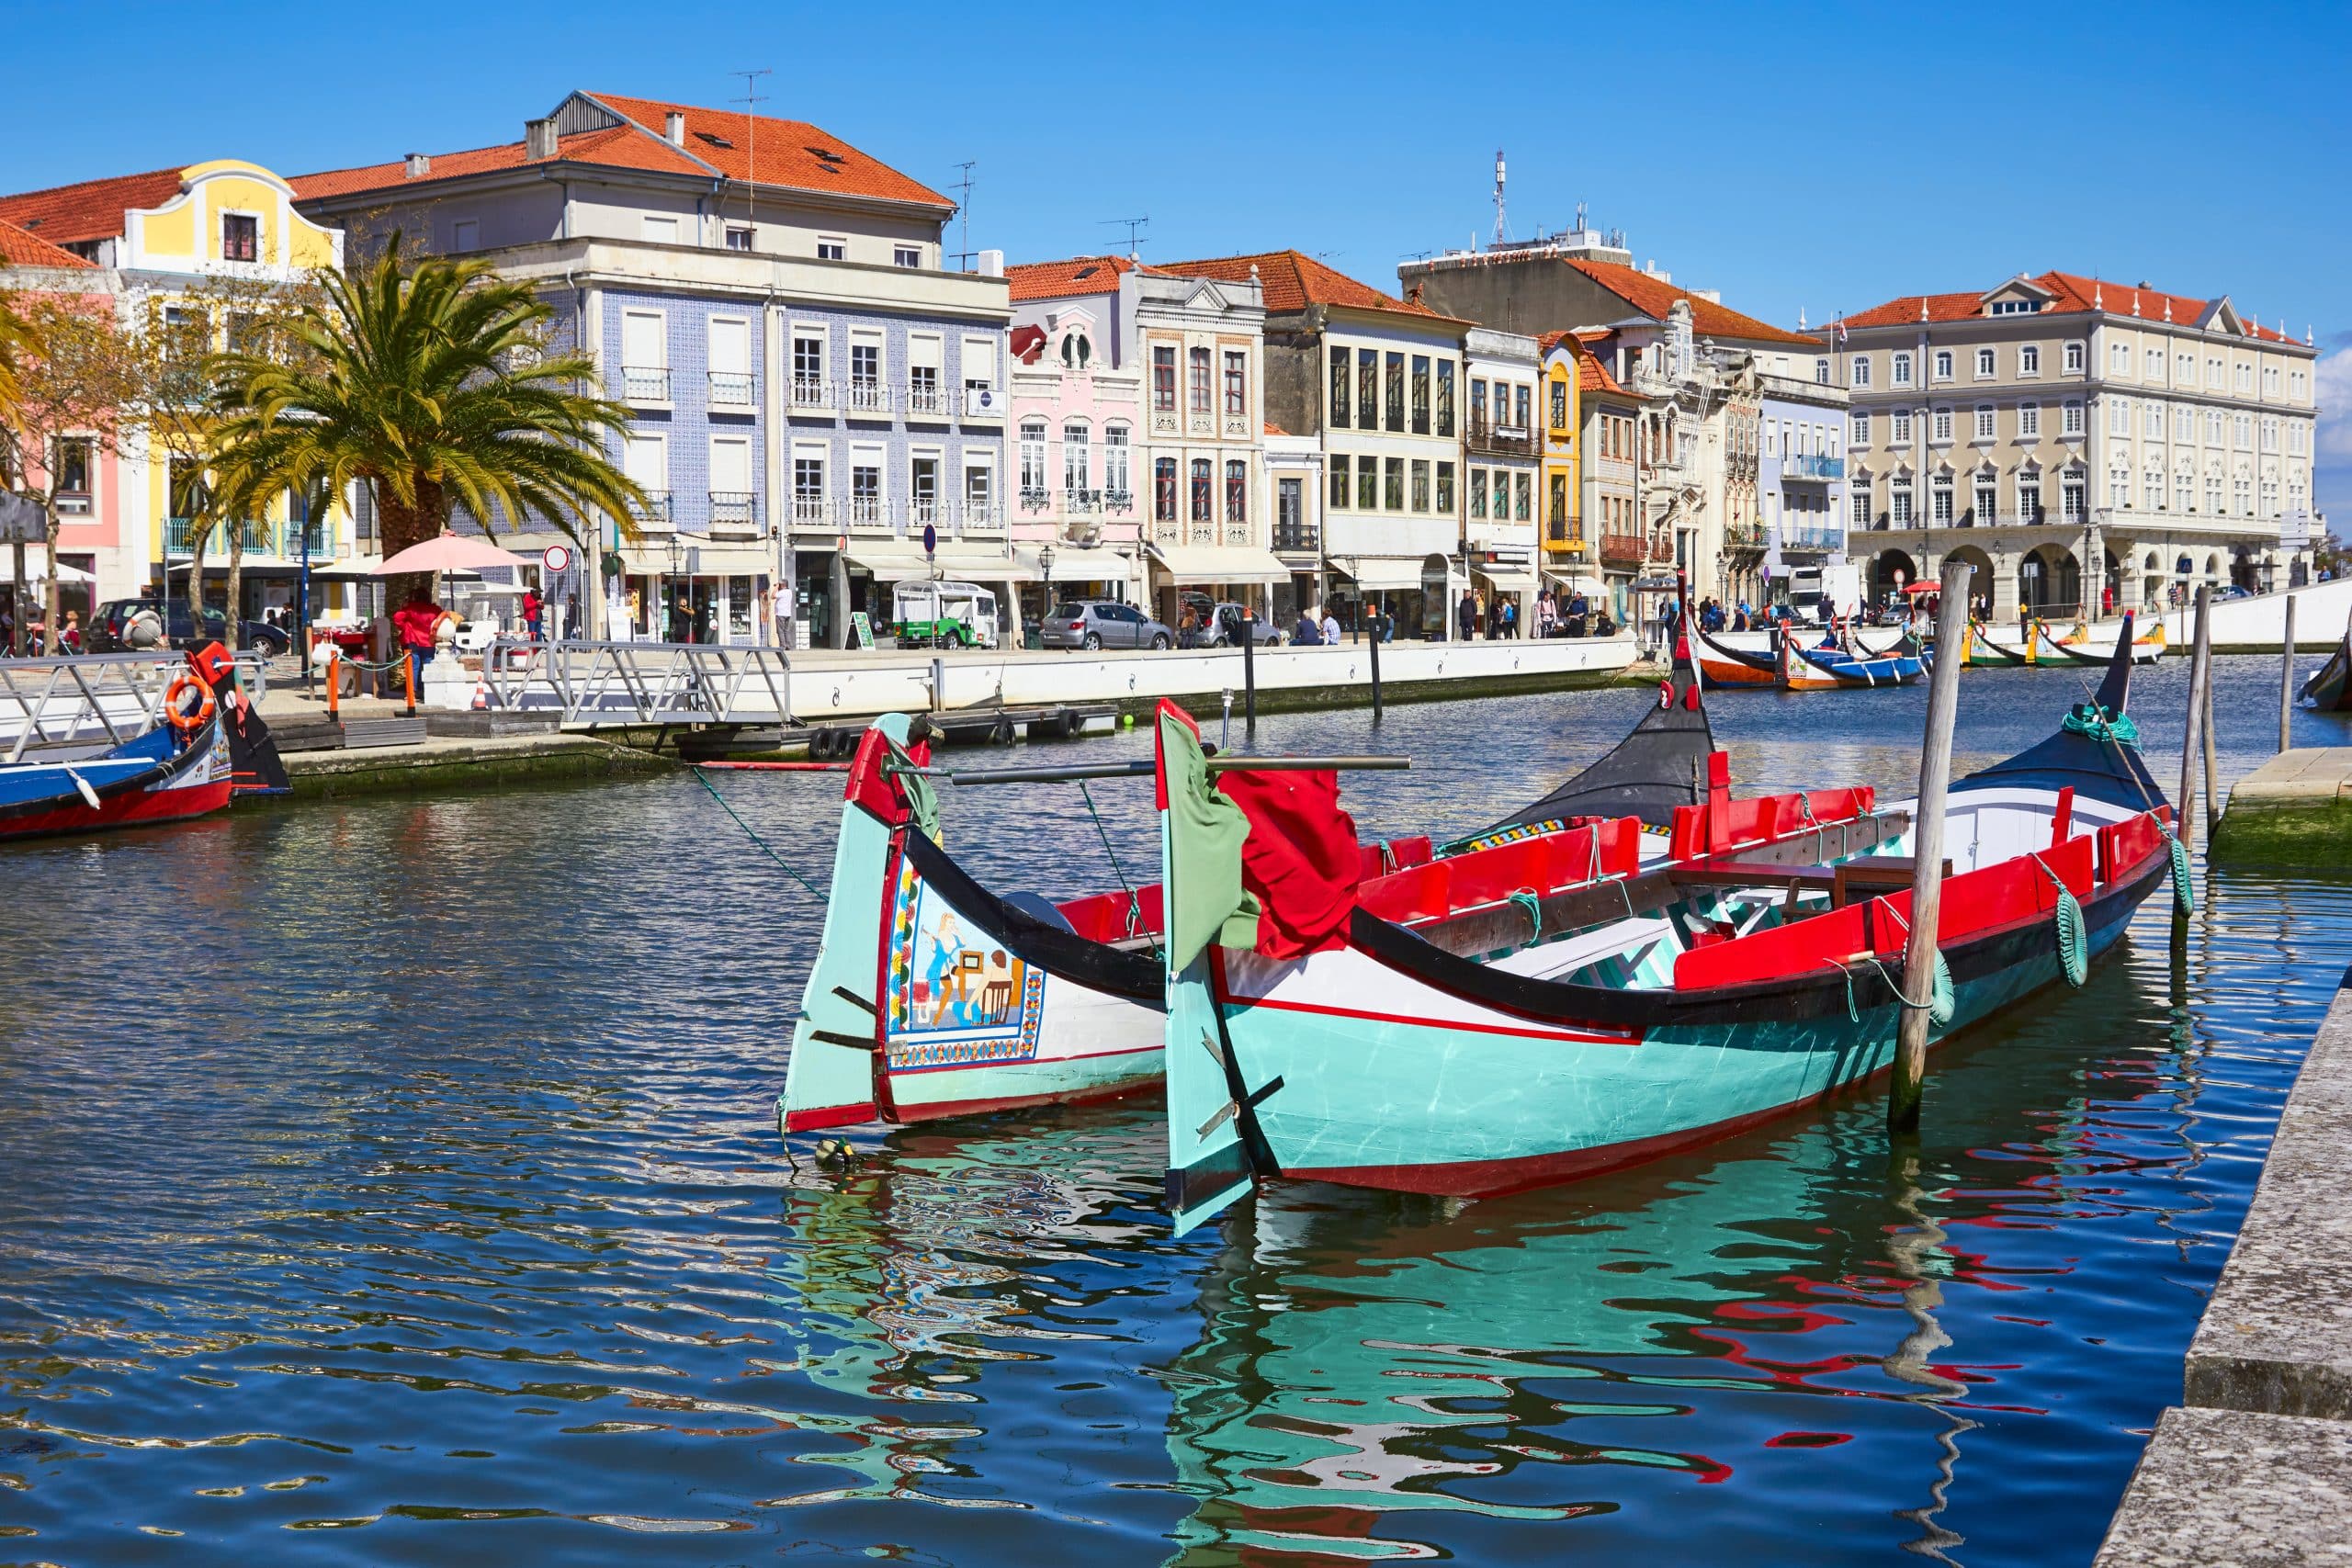 Traditional colorful boats moored along the canal in Aveiro, Portugal, with historical buildings in the background